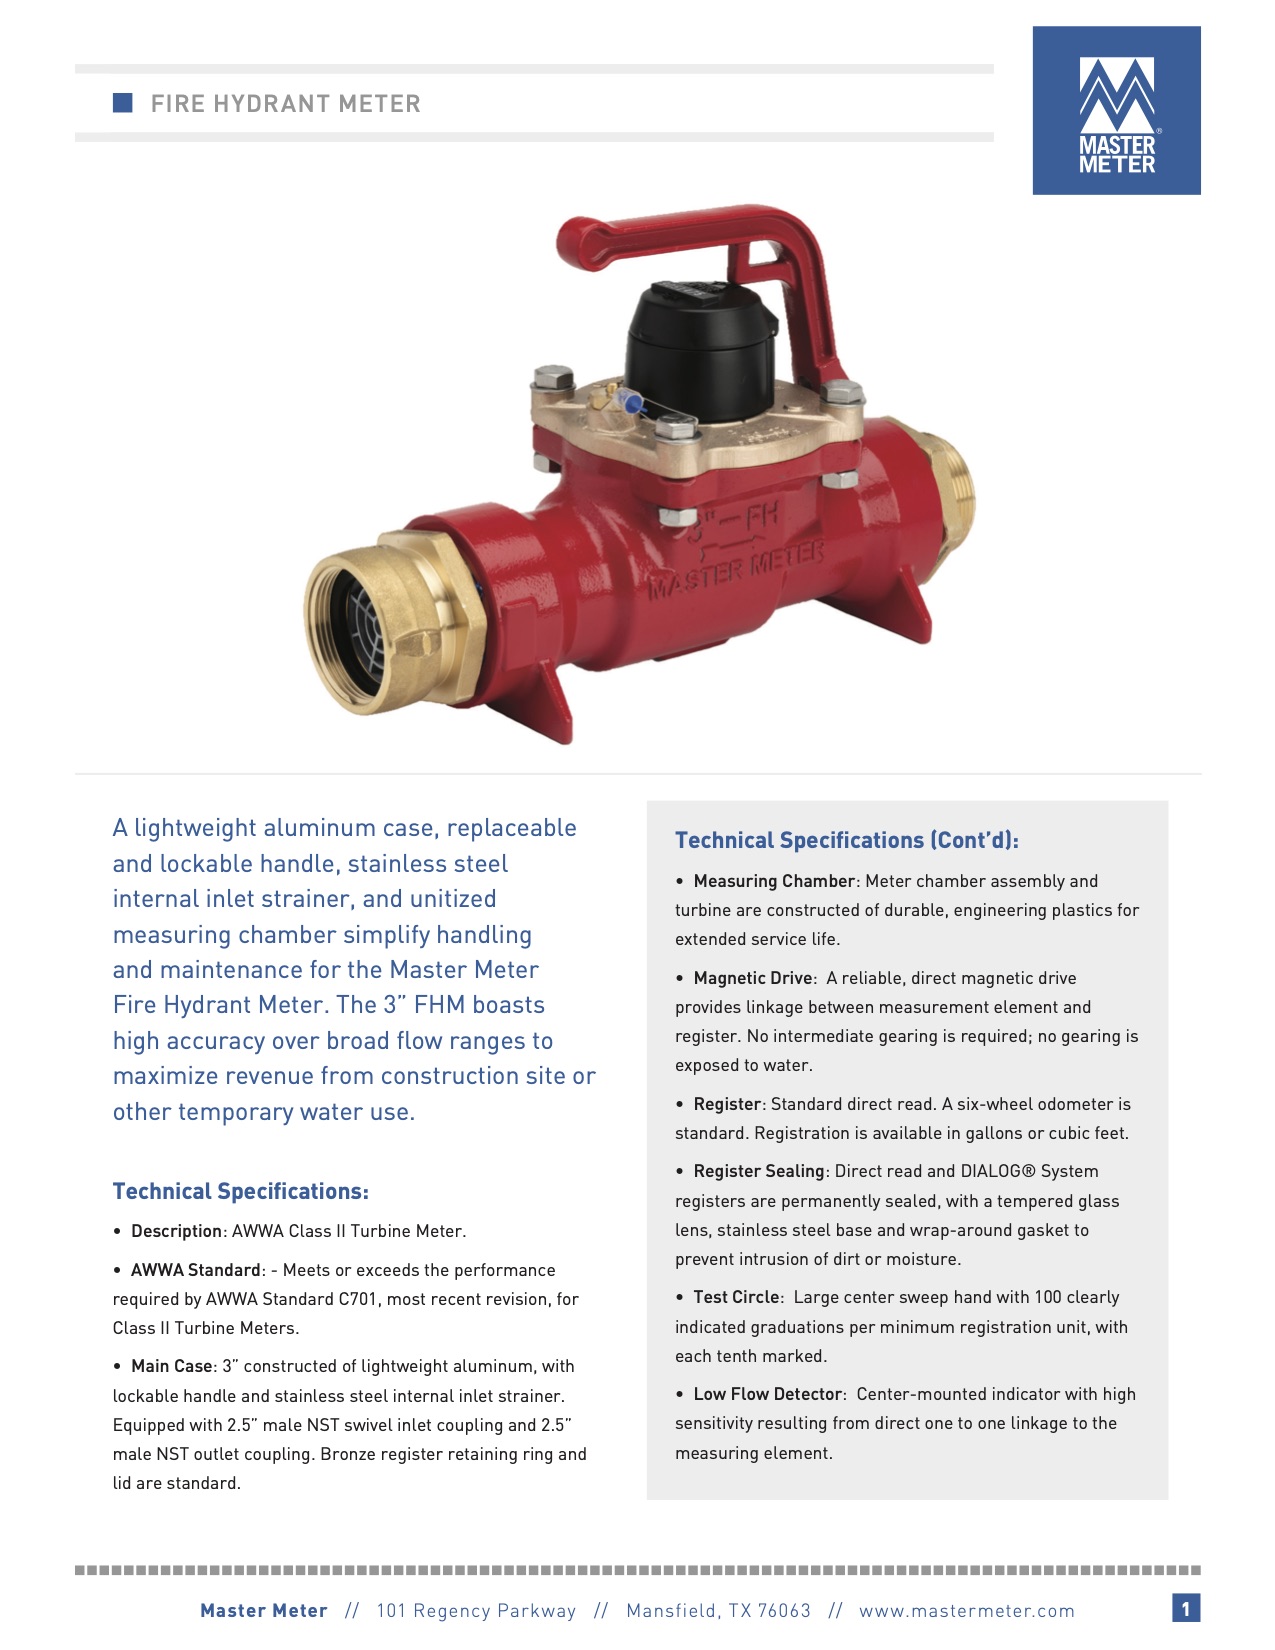 Fire Hydrant Meter (FHM)